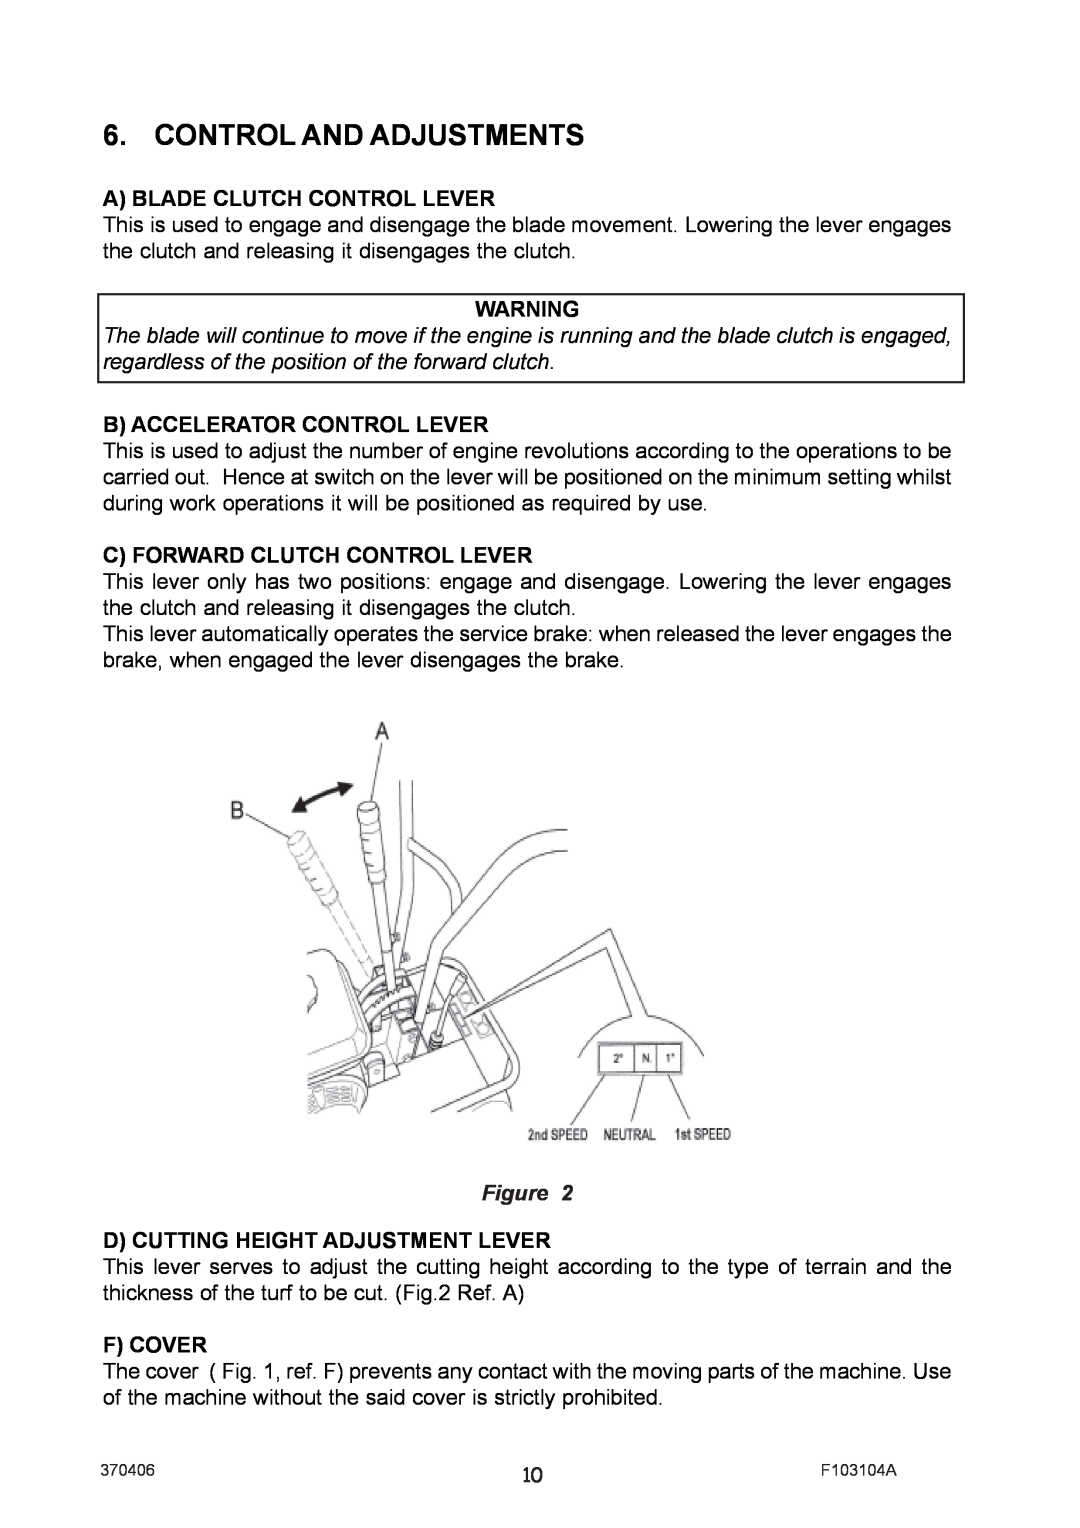 Billy Goat SC121H manual Control And Adjustments, A Blade Clutch Control Lever, B Accelerator Control Lever, F Cover 